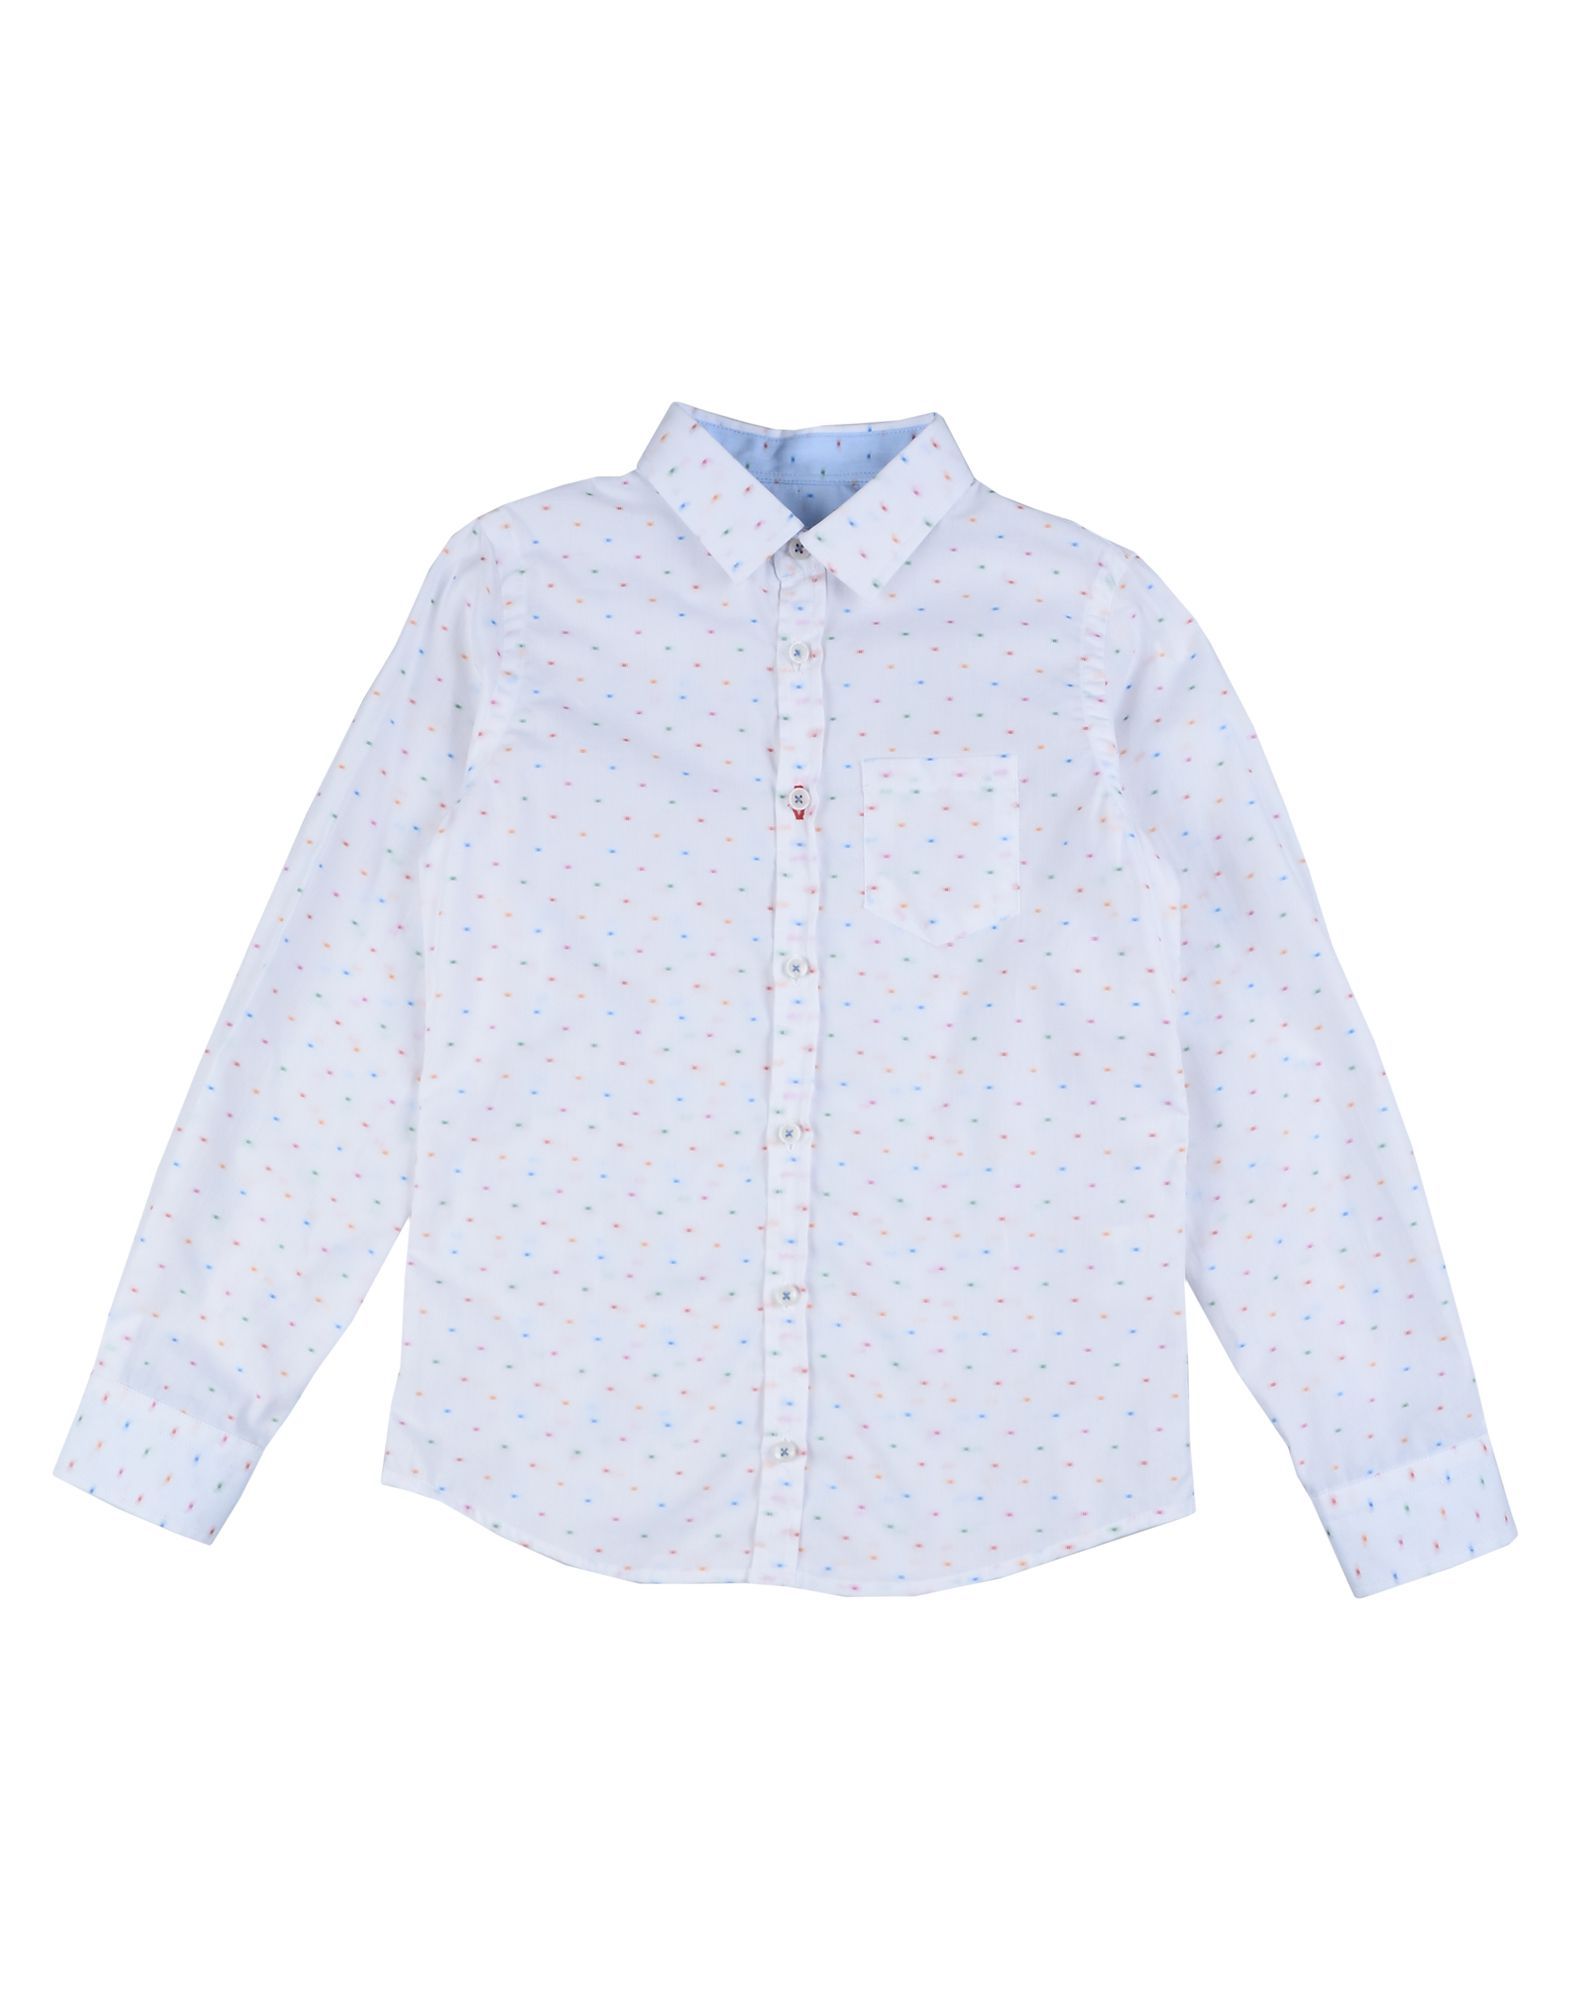 Ronnie Kay Kids' Shirts In White